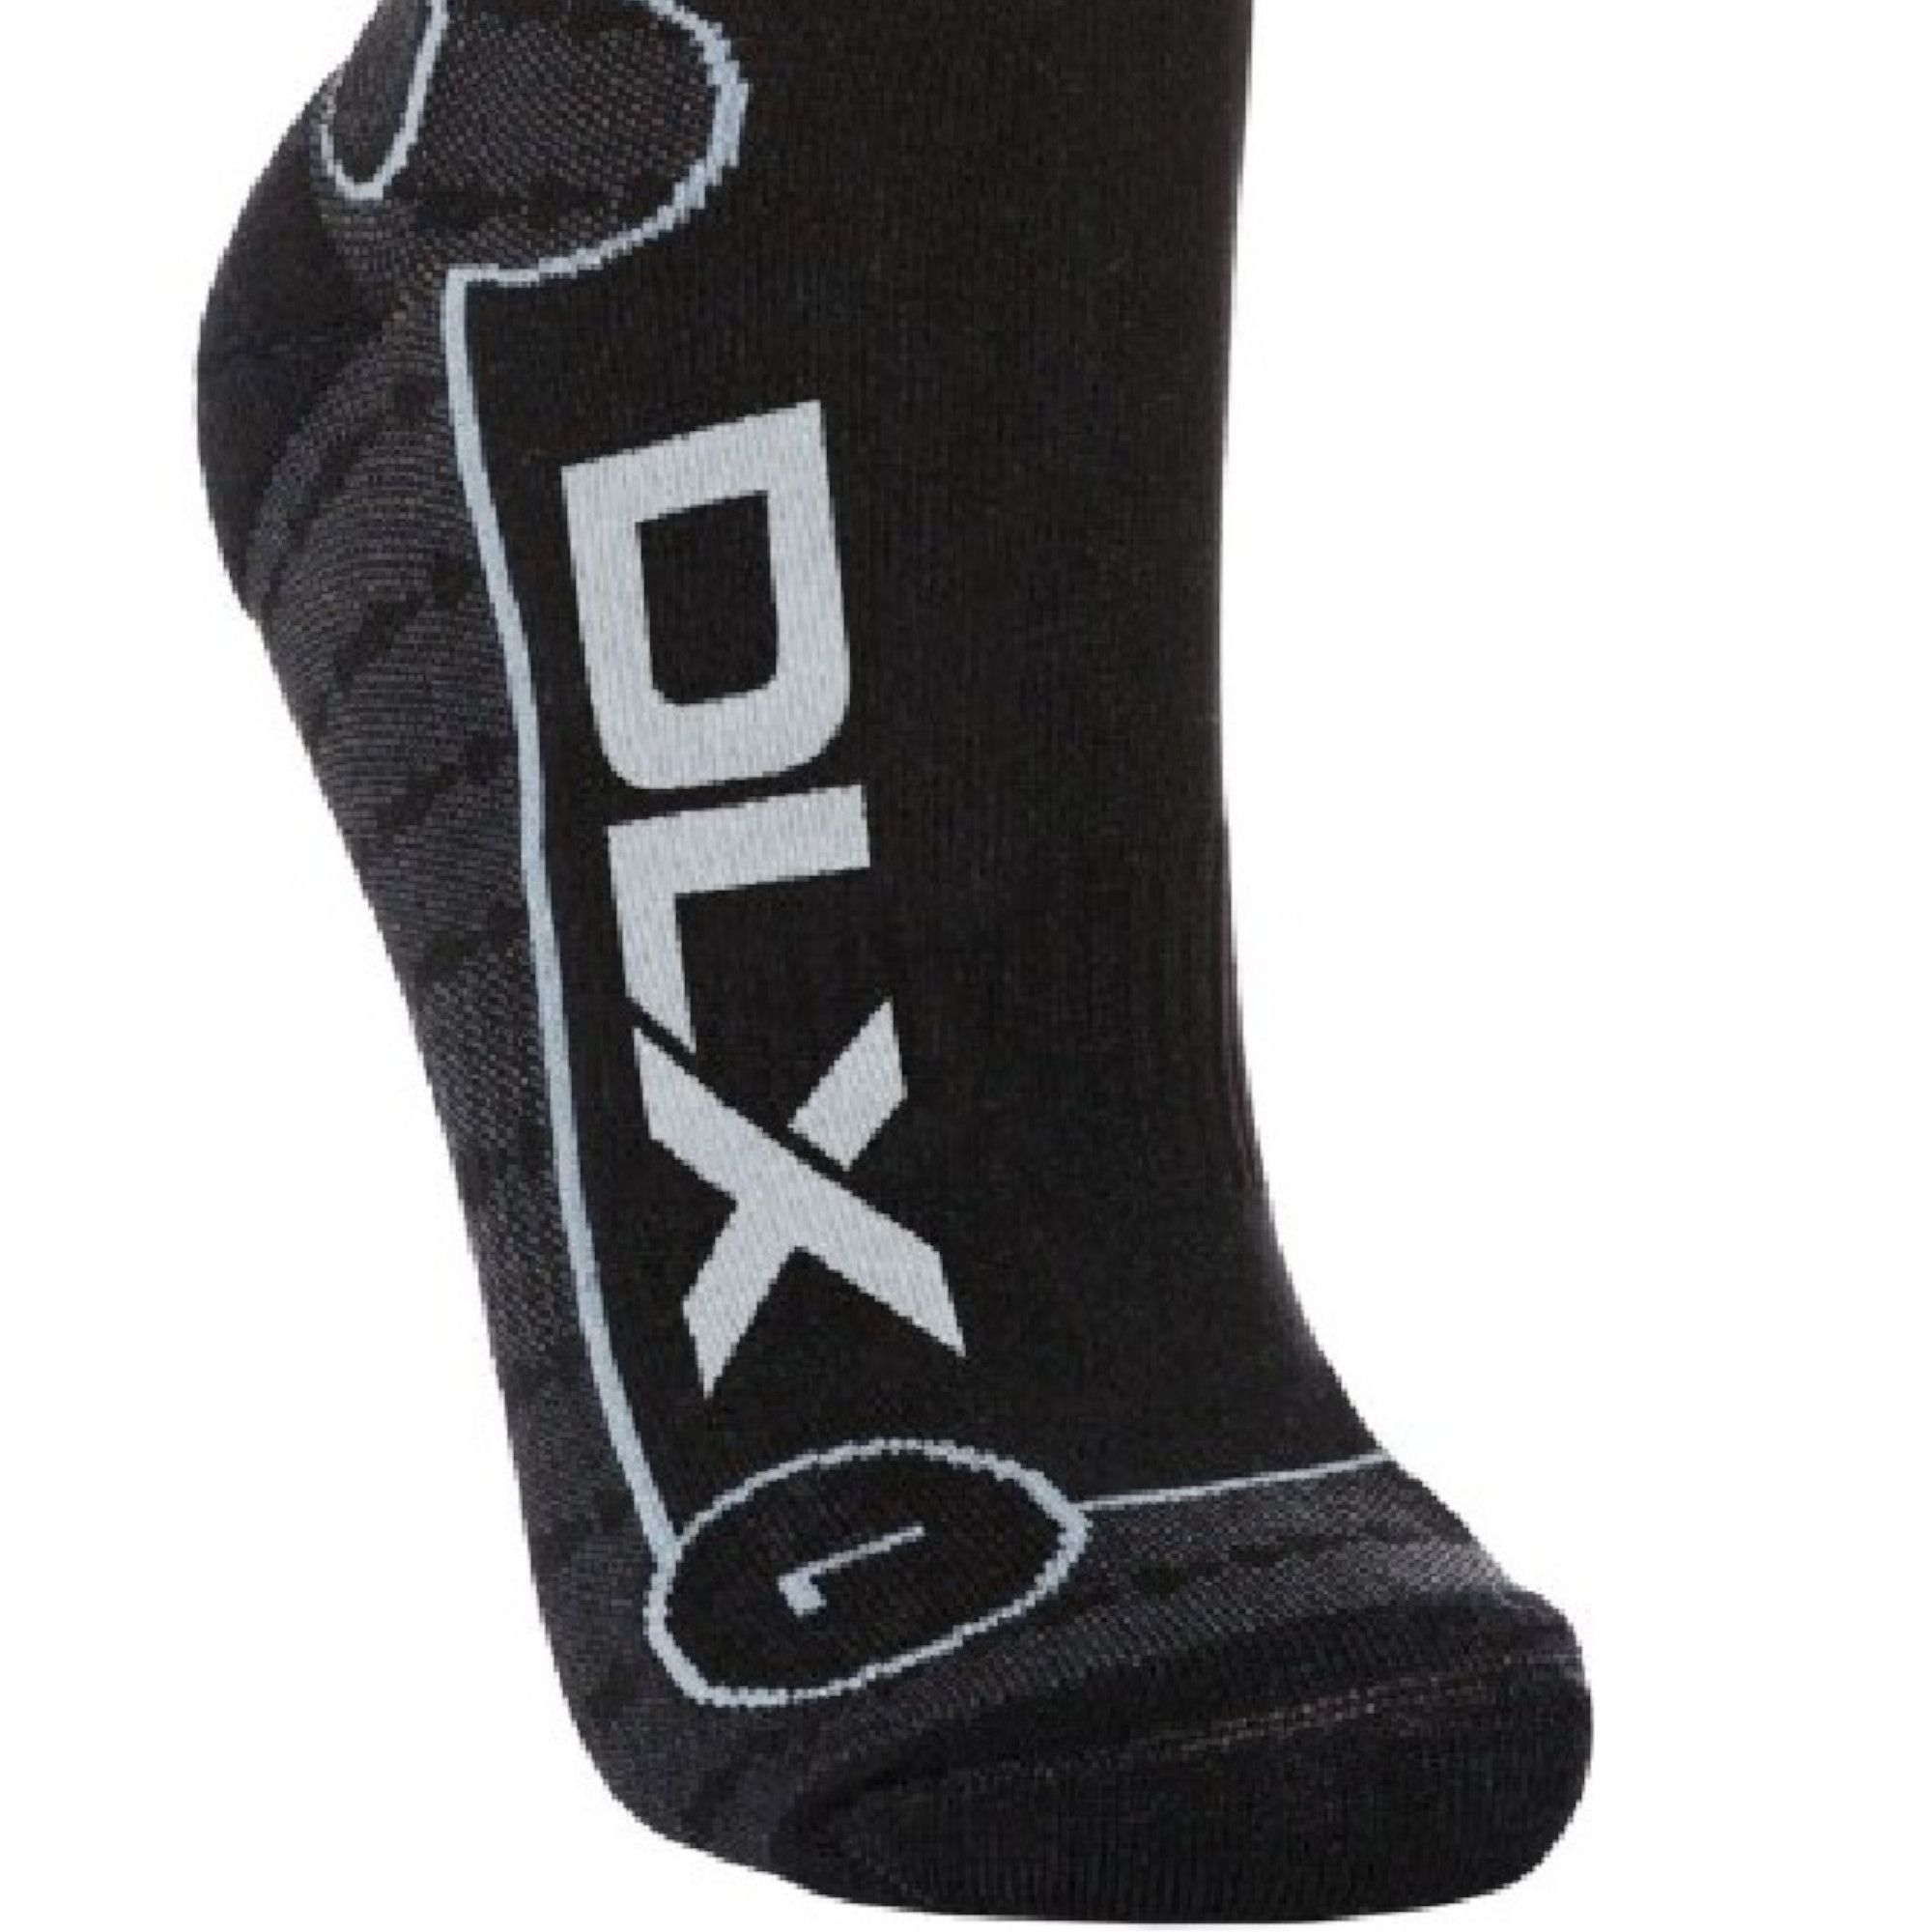 Technical ski sock. Anatomical fit. Reinforced heel. Moisture wicking. Ankle and arch support. 51% Polyamide, 20% Merino wool, 20% Polypropylene, 7% Nylon, 2% Elastane.